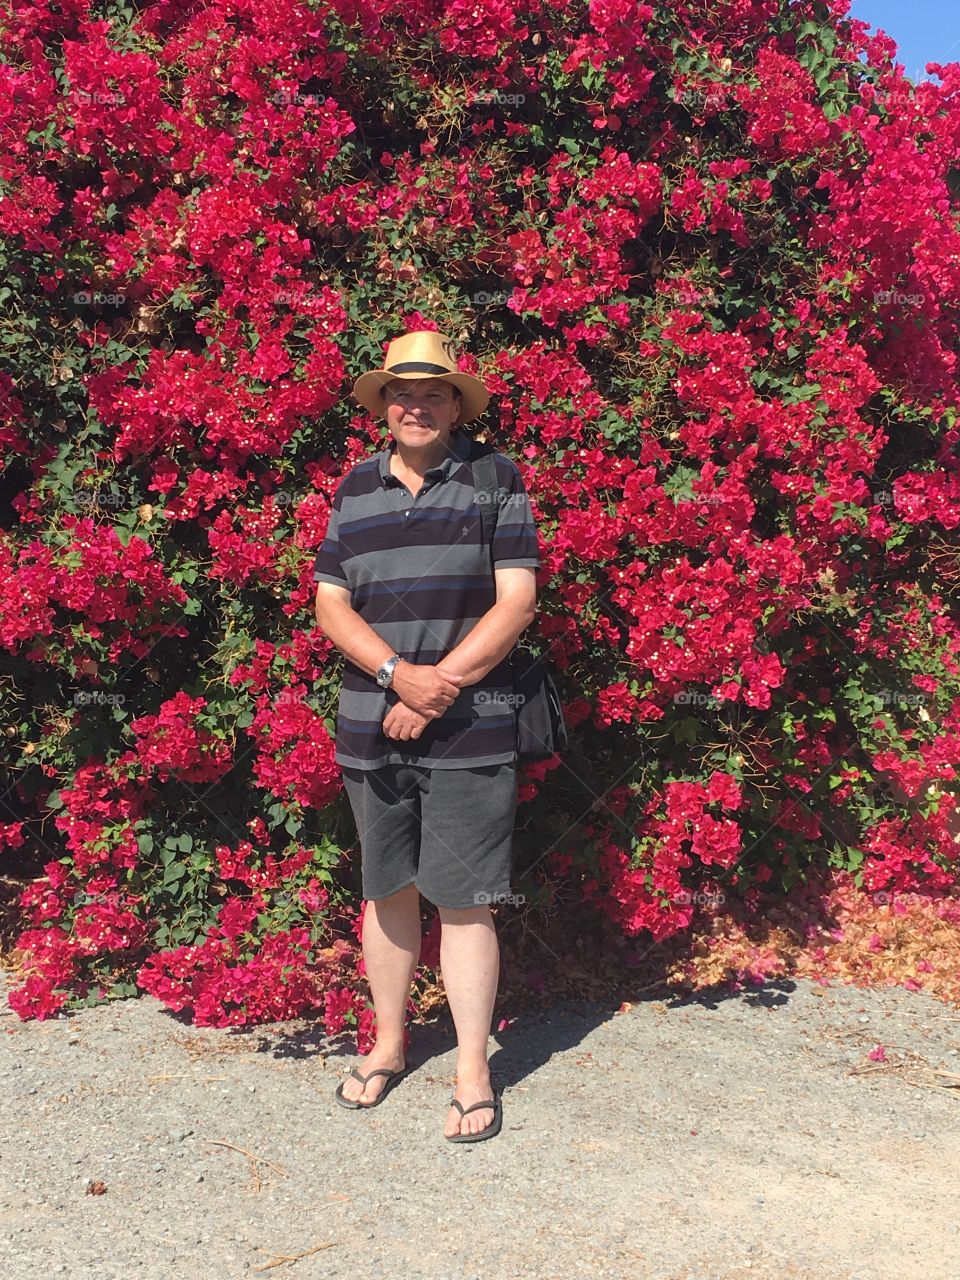 Pic of a friend next to a lovely red Shrubs in Cyprus